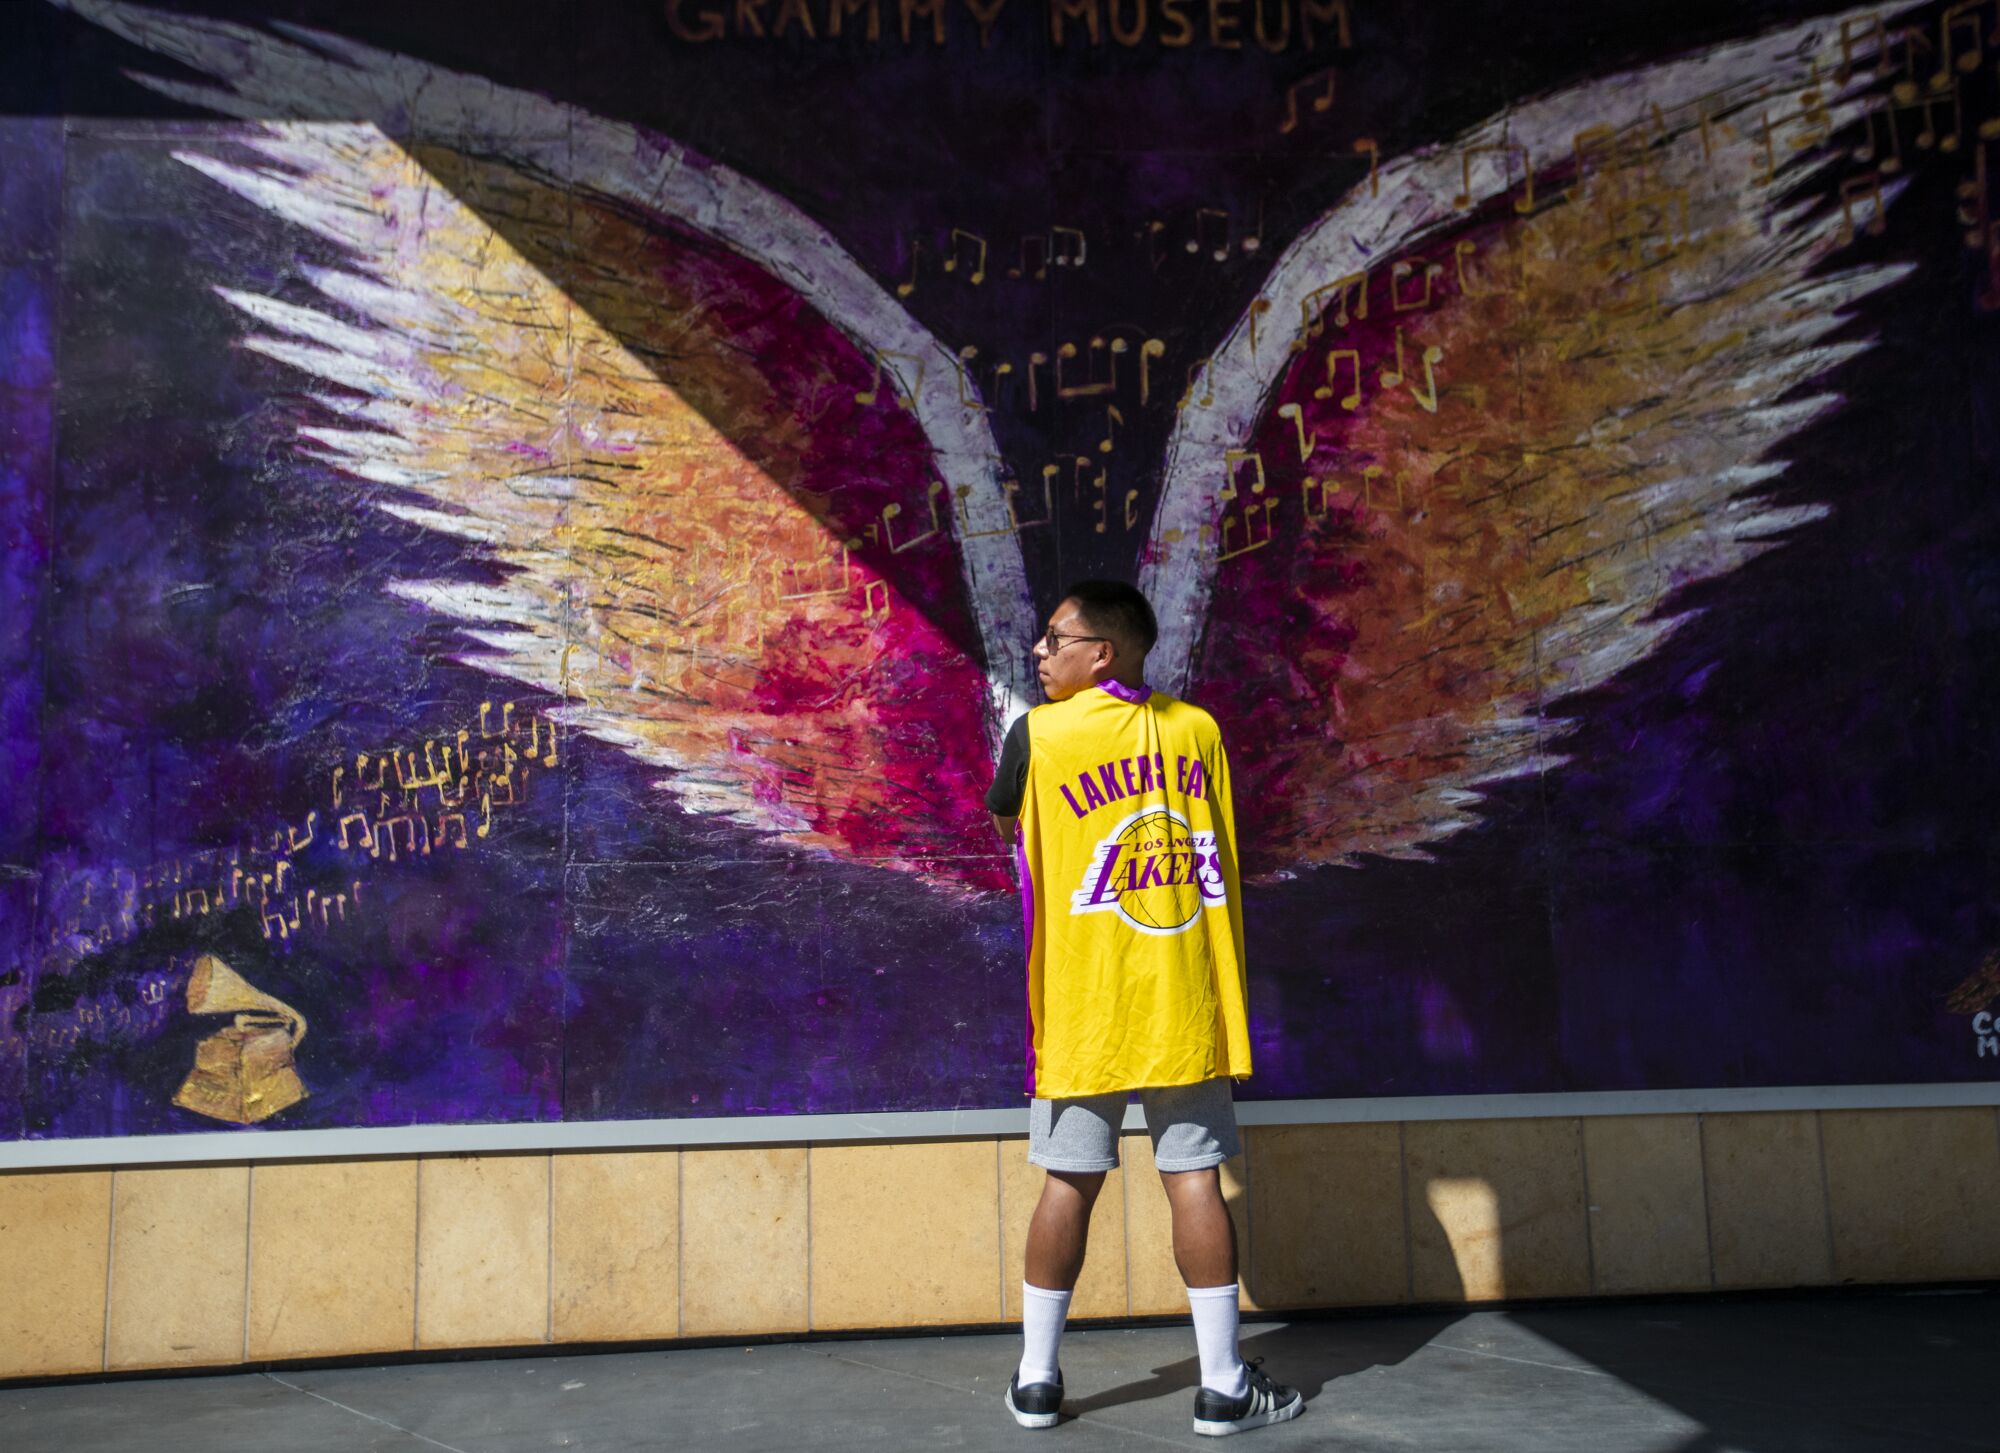 Lakers fan Emanuel Pascual, of Alhambra, takes a photo in front of a mural outside the Grammy Museum at L.A. Live.